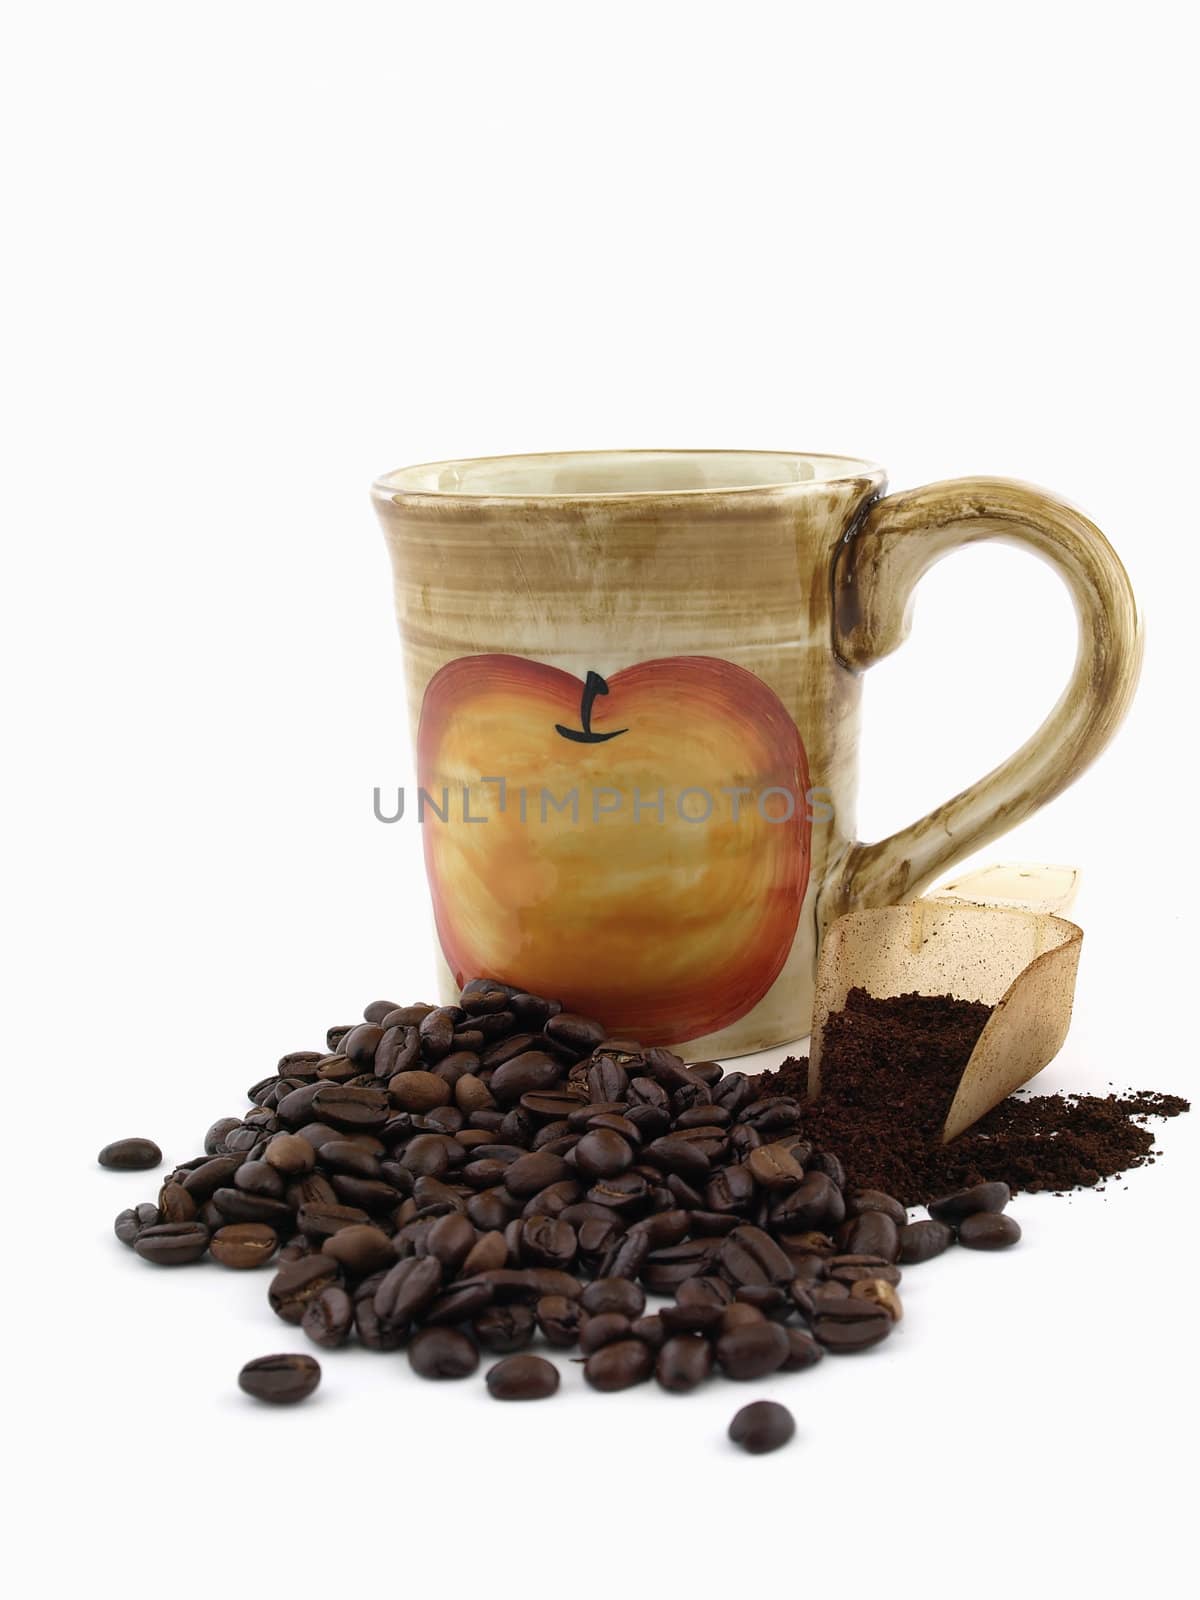 Dark roasted coffee beans and fresh ground coffee in a scoop with a coffee cup on a white background.